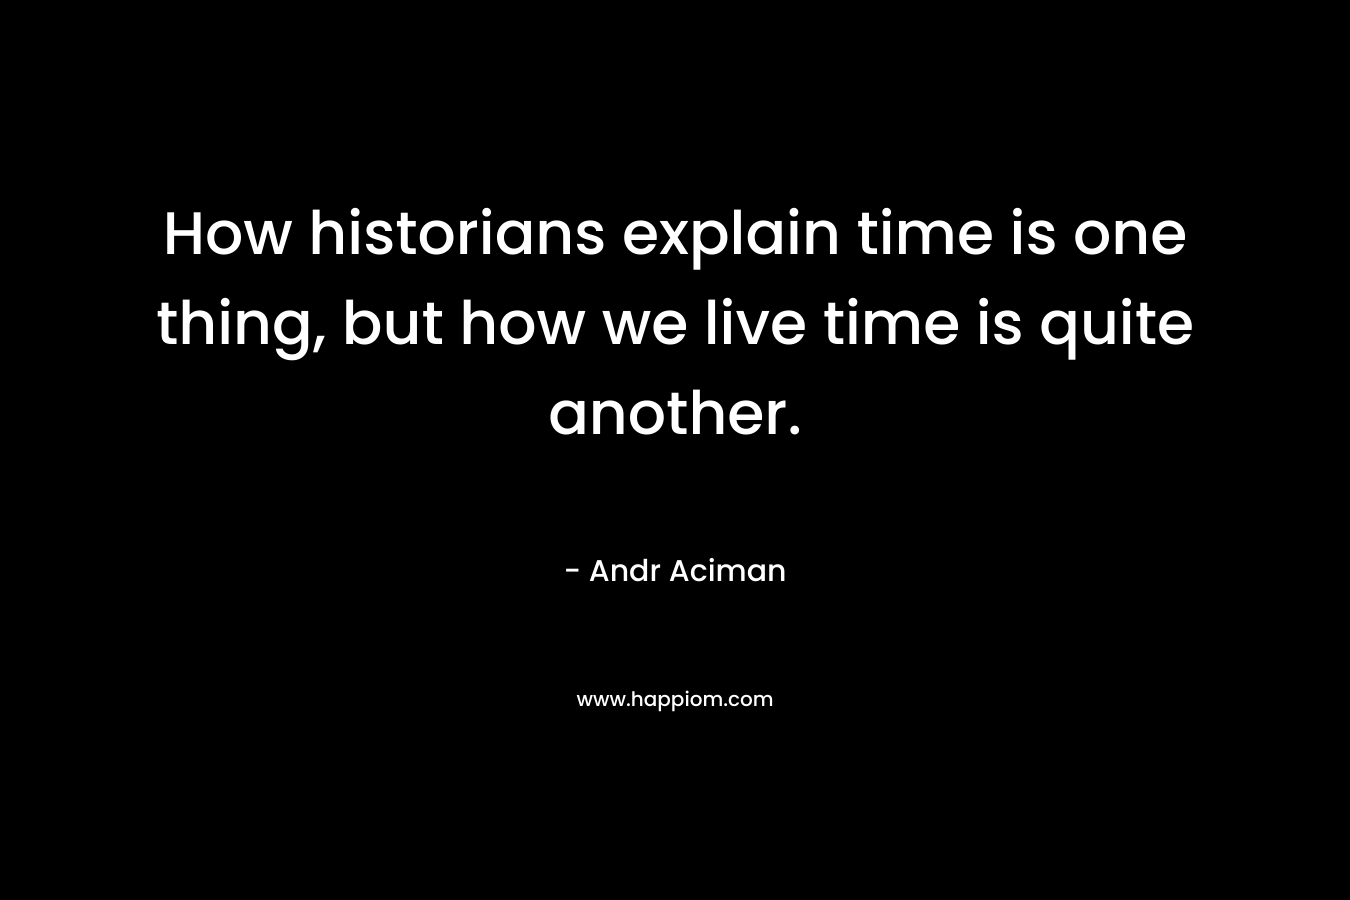 How historians explain time is one thing, but how we live time is quite another.